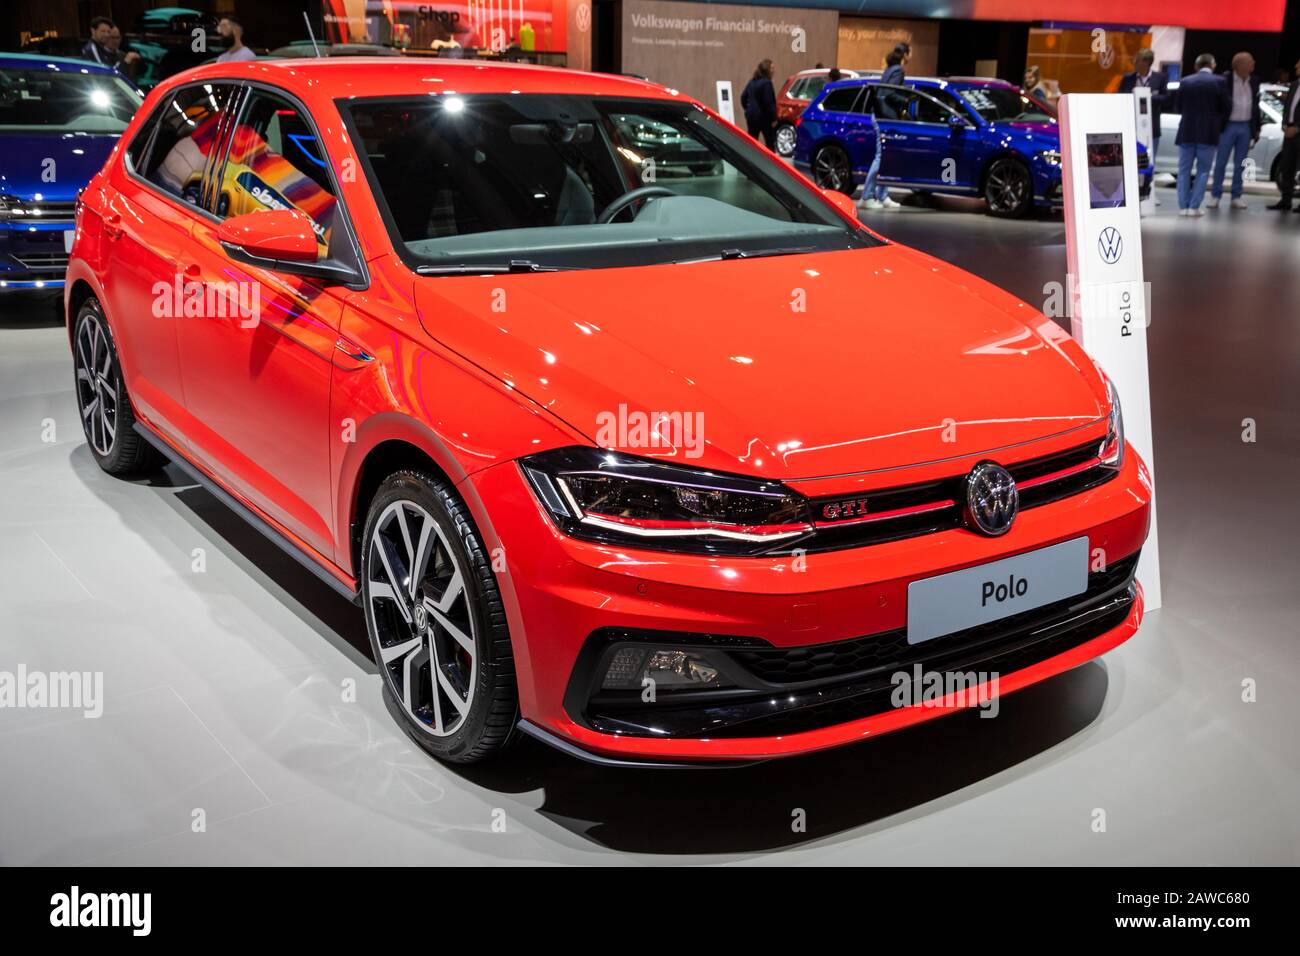 BRUSSELS - JAN 9, 2020: New Volkswagen Polo GTI car model showcased at the  Brussels Autosalon 2020 Motor Show Stock Photo - Alamy